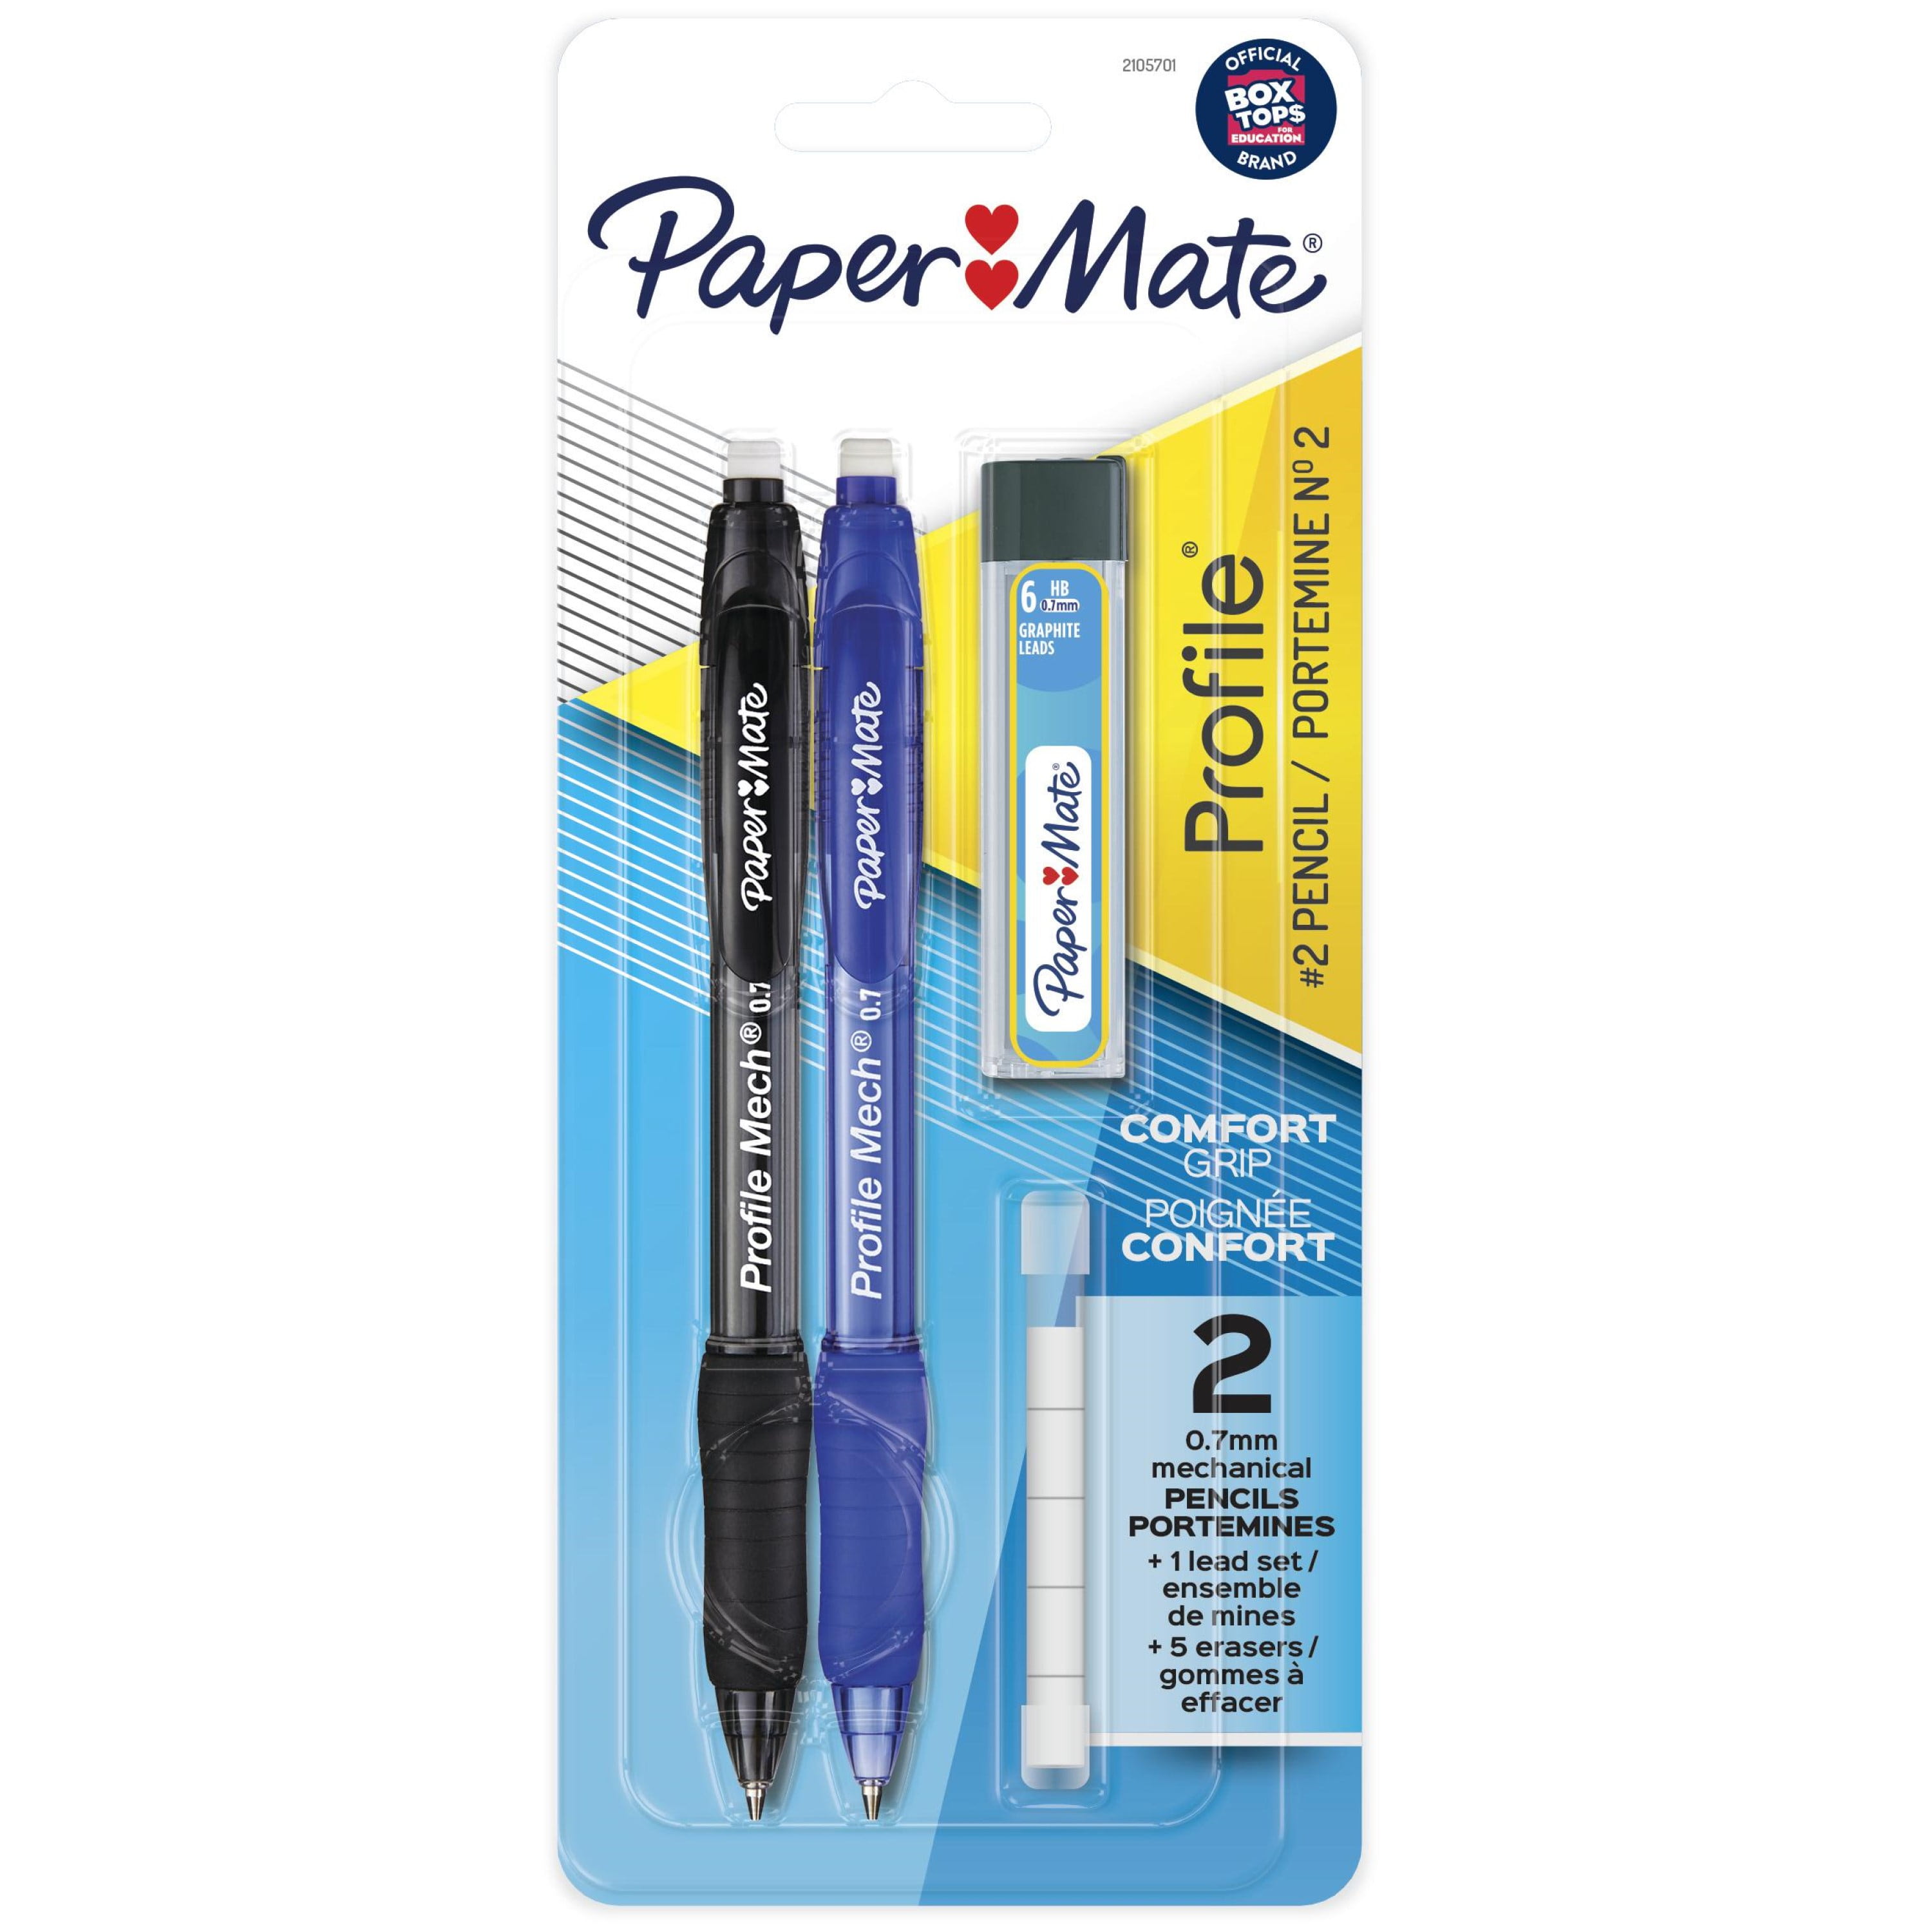  Paper Mate Clearpoint Mechanical Pencils, 0.7mm, HB #2,  Fashion Barrels, 4 Count : Office Products